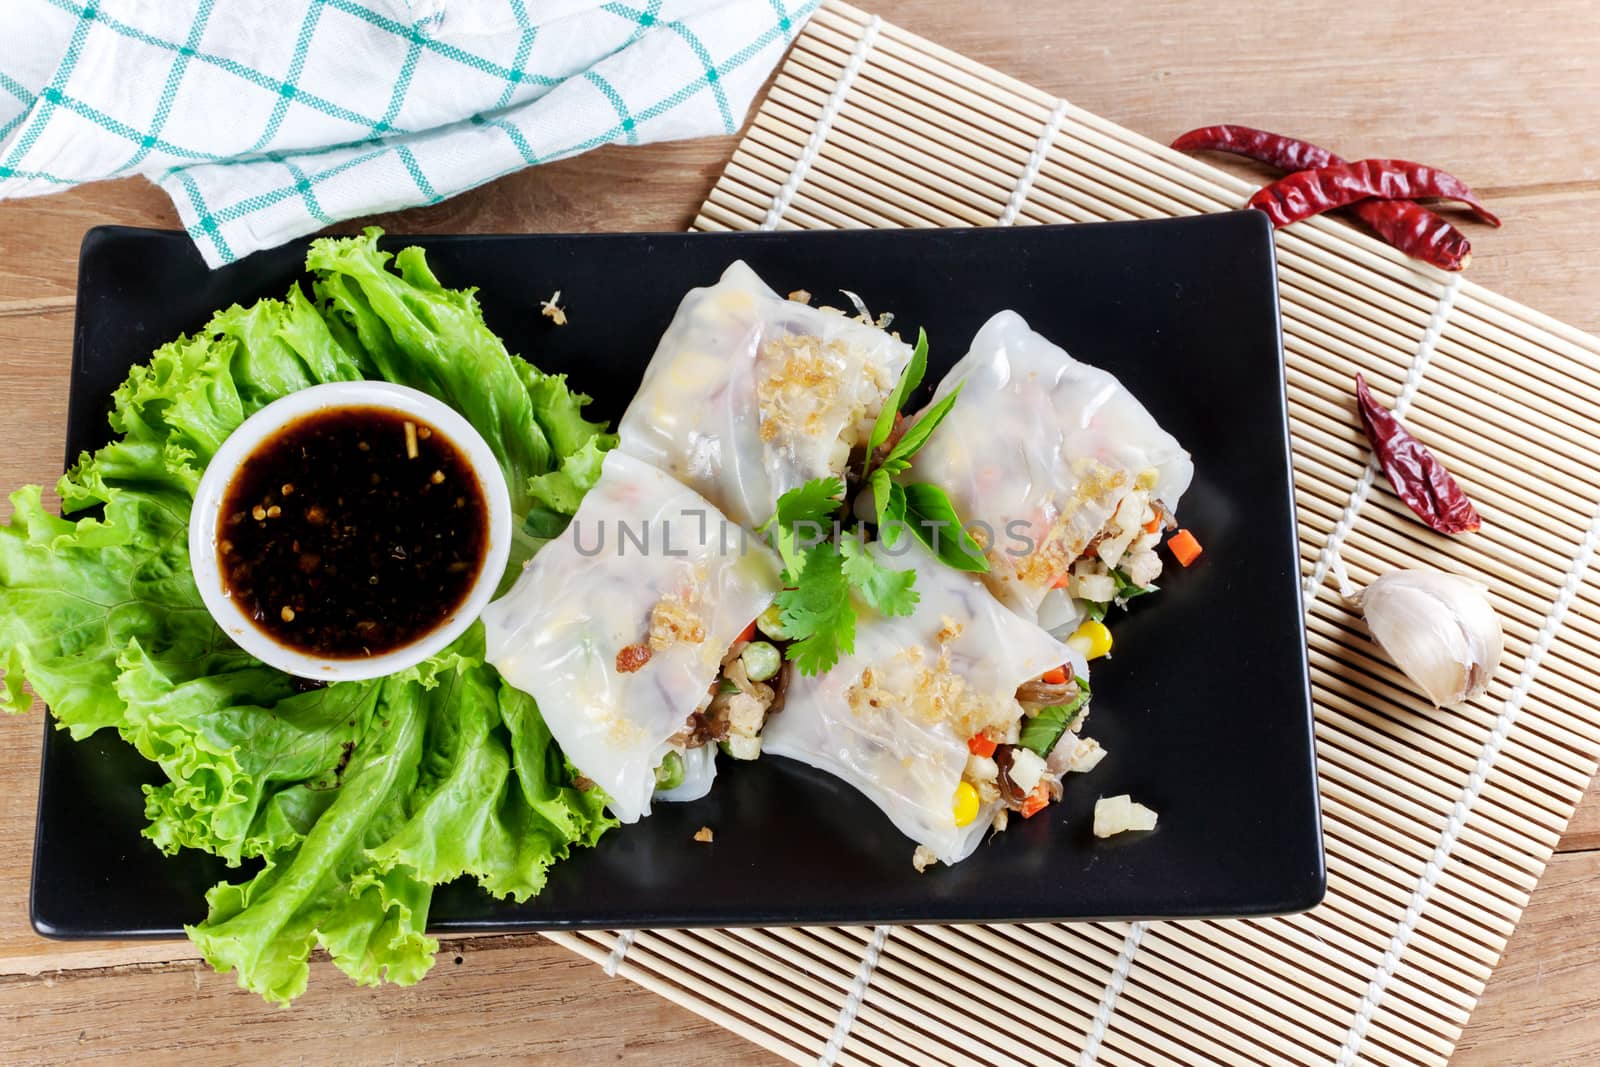 Noodle tube is appetizer menu Asia. made from noodle stuffed with pork and vegetables cooking by steamed.